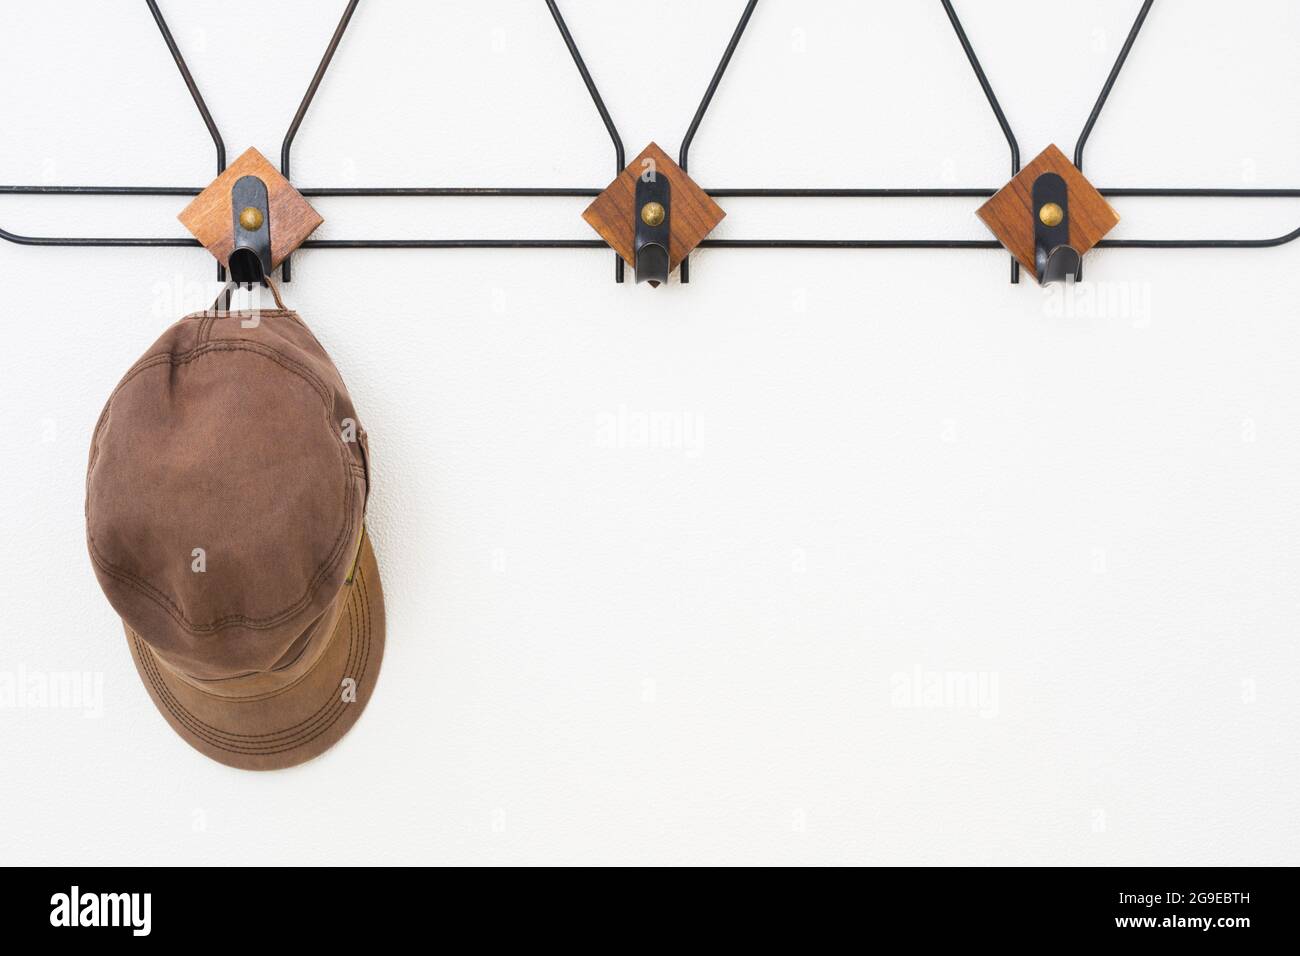 Empty hanger with black metal and wooden elements on white textured wall and cap Stock Photo